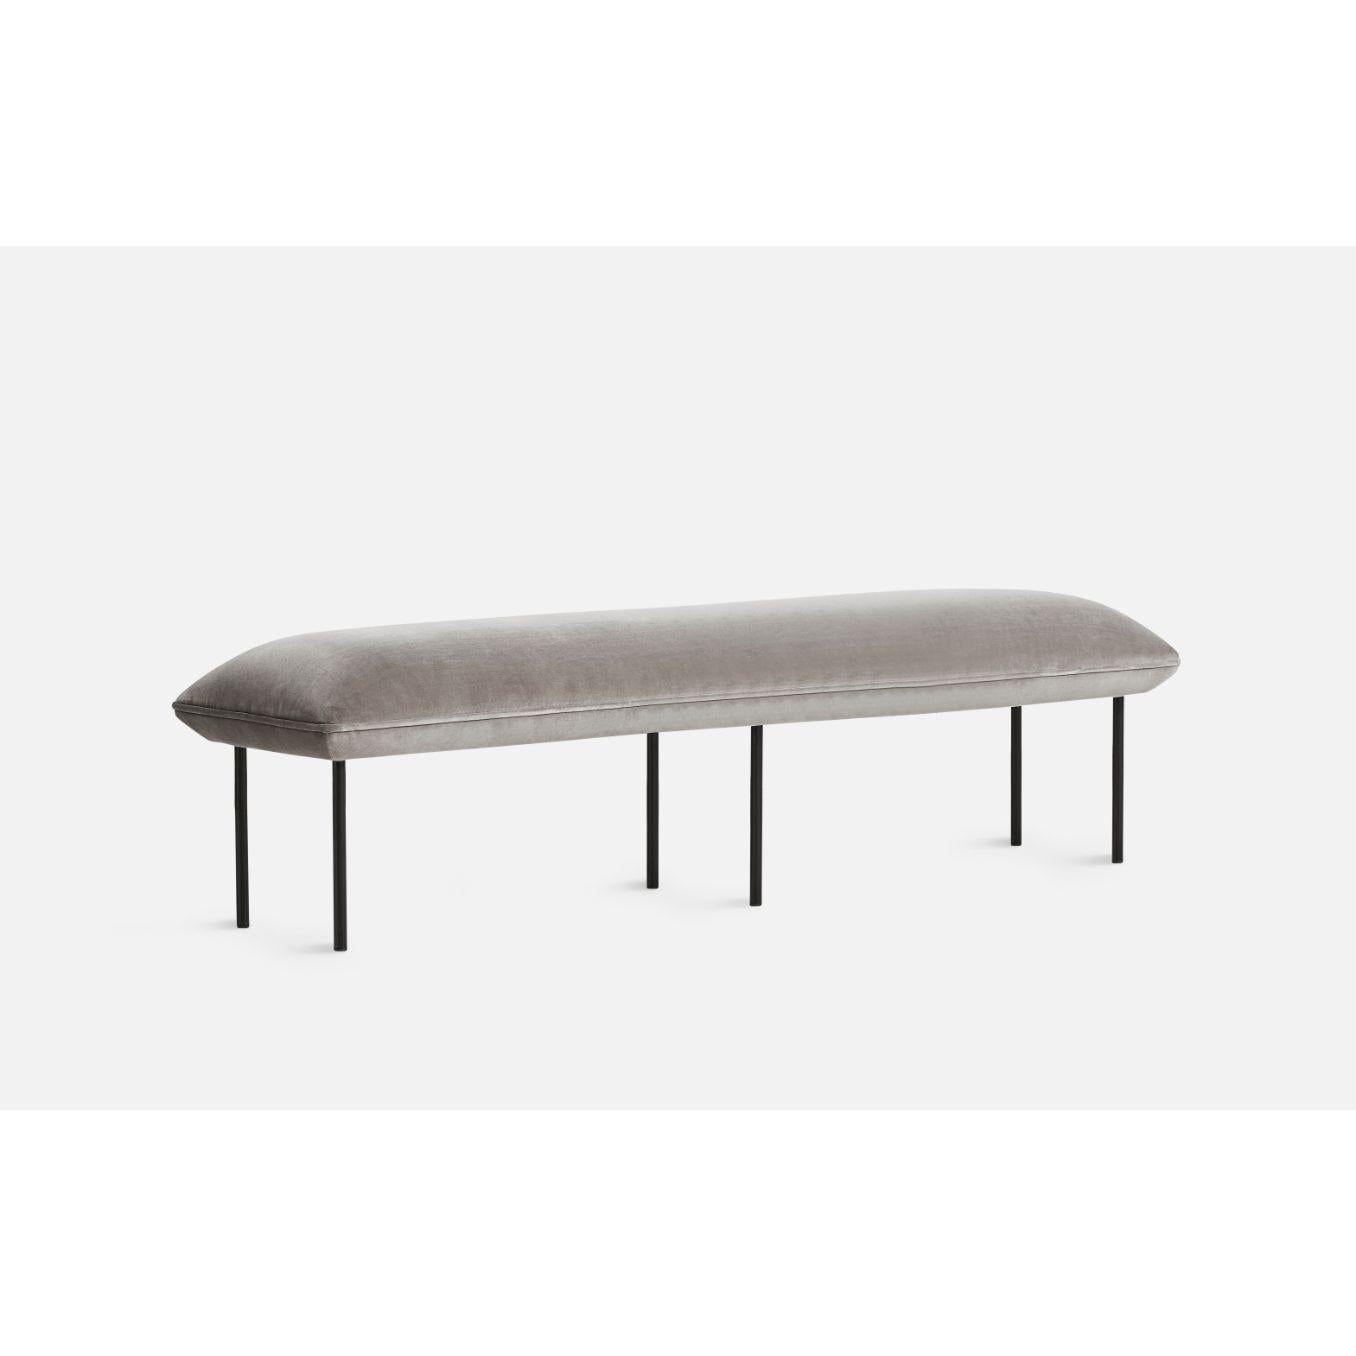 Nakki tall bench by Mika Tolvane.
Materials: foam, plywood, elastic belts, fabric (Harald 3, 0143).
Dimensions: D 45 x W 200 x H 51 cm.
Also available in different colours and materials.

The founders, Mia and Torben Koed, decided to put their